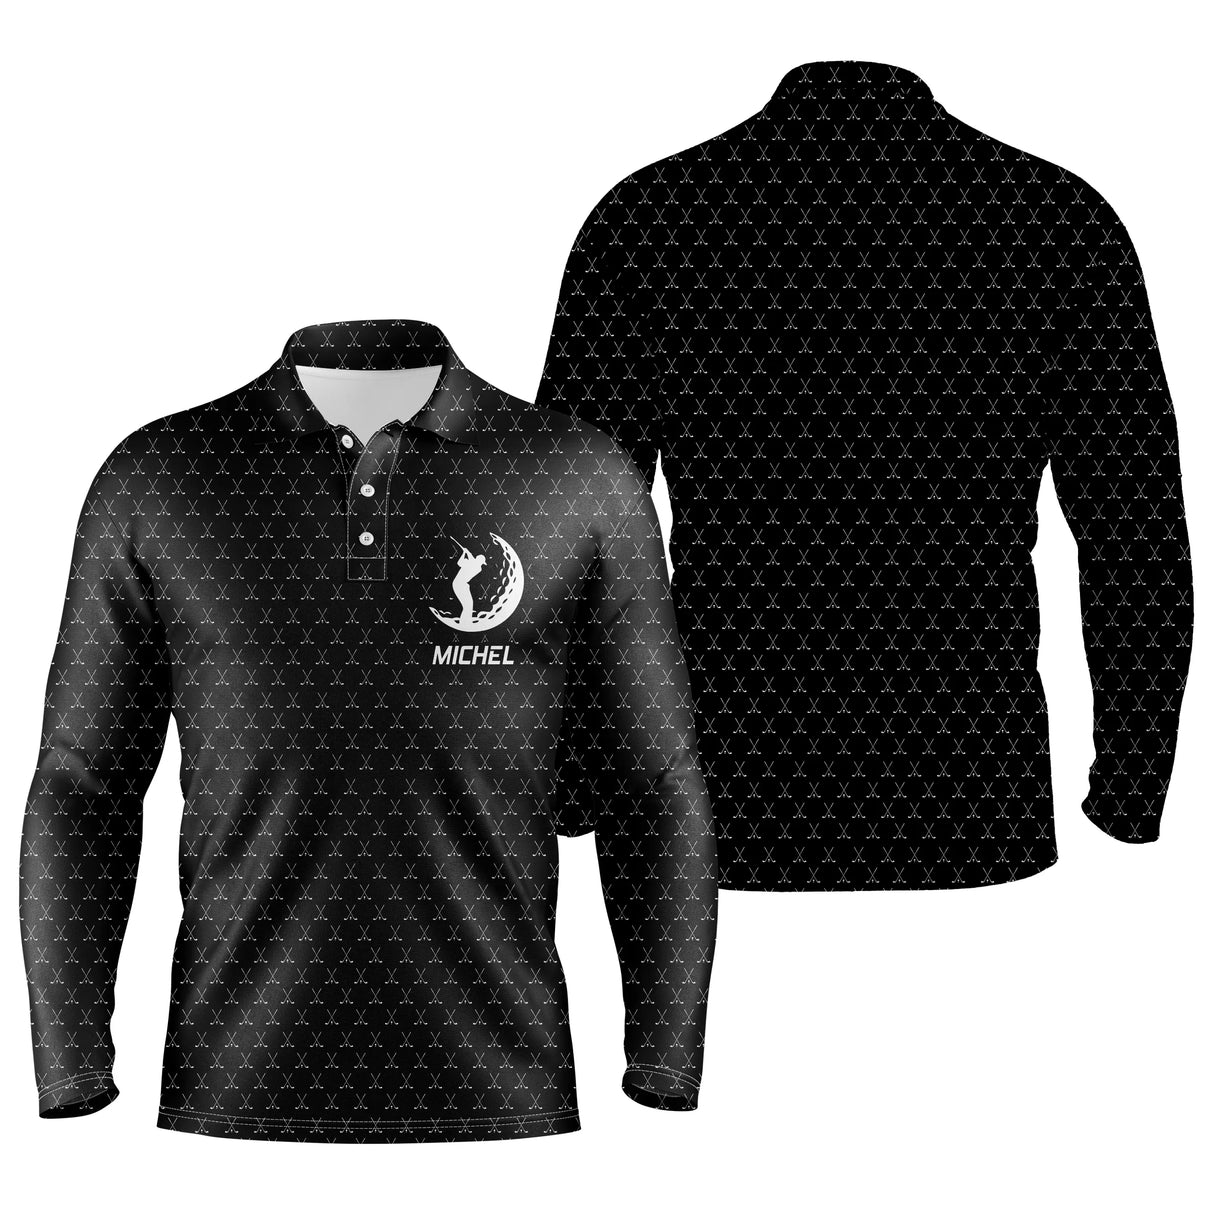 Long Sleeve Golf Polo Shirt, Personalized Golfer Gift, Golf Club Pattern - CTS17052224